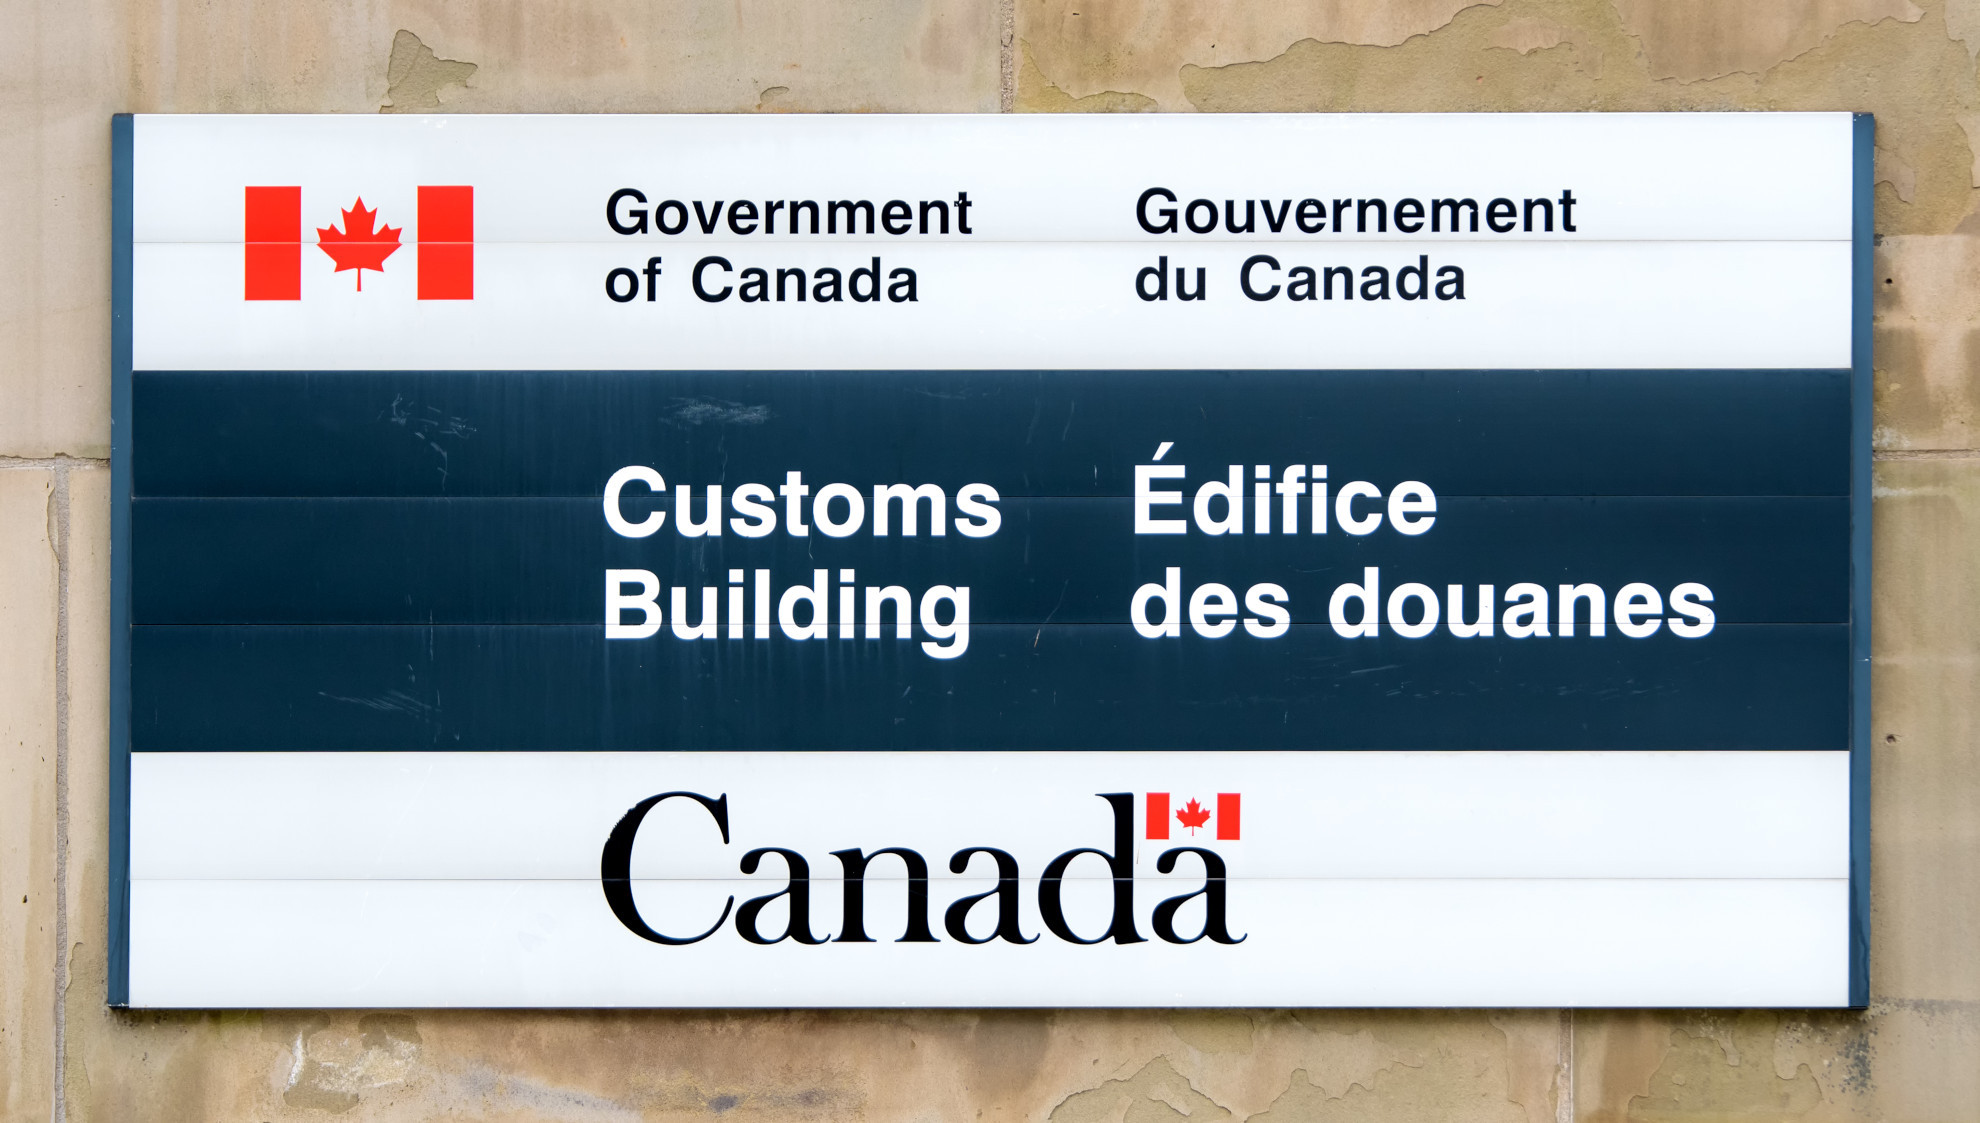 Is CanadaIMS a Fake Company? | Only true about